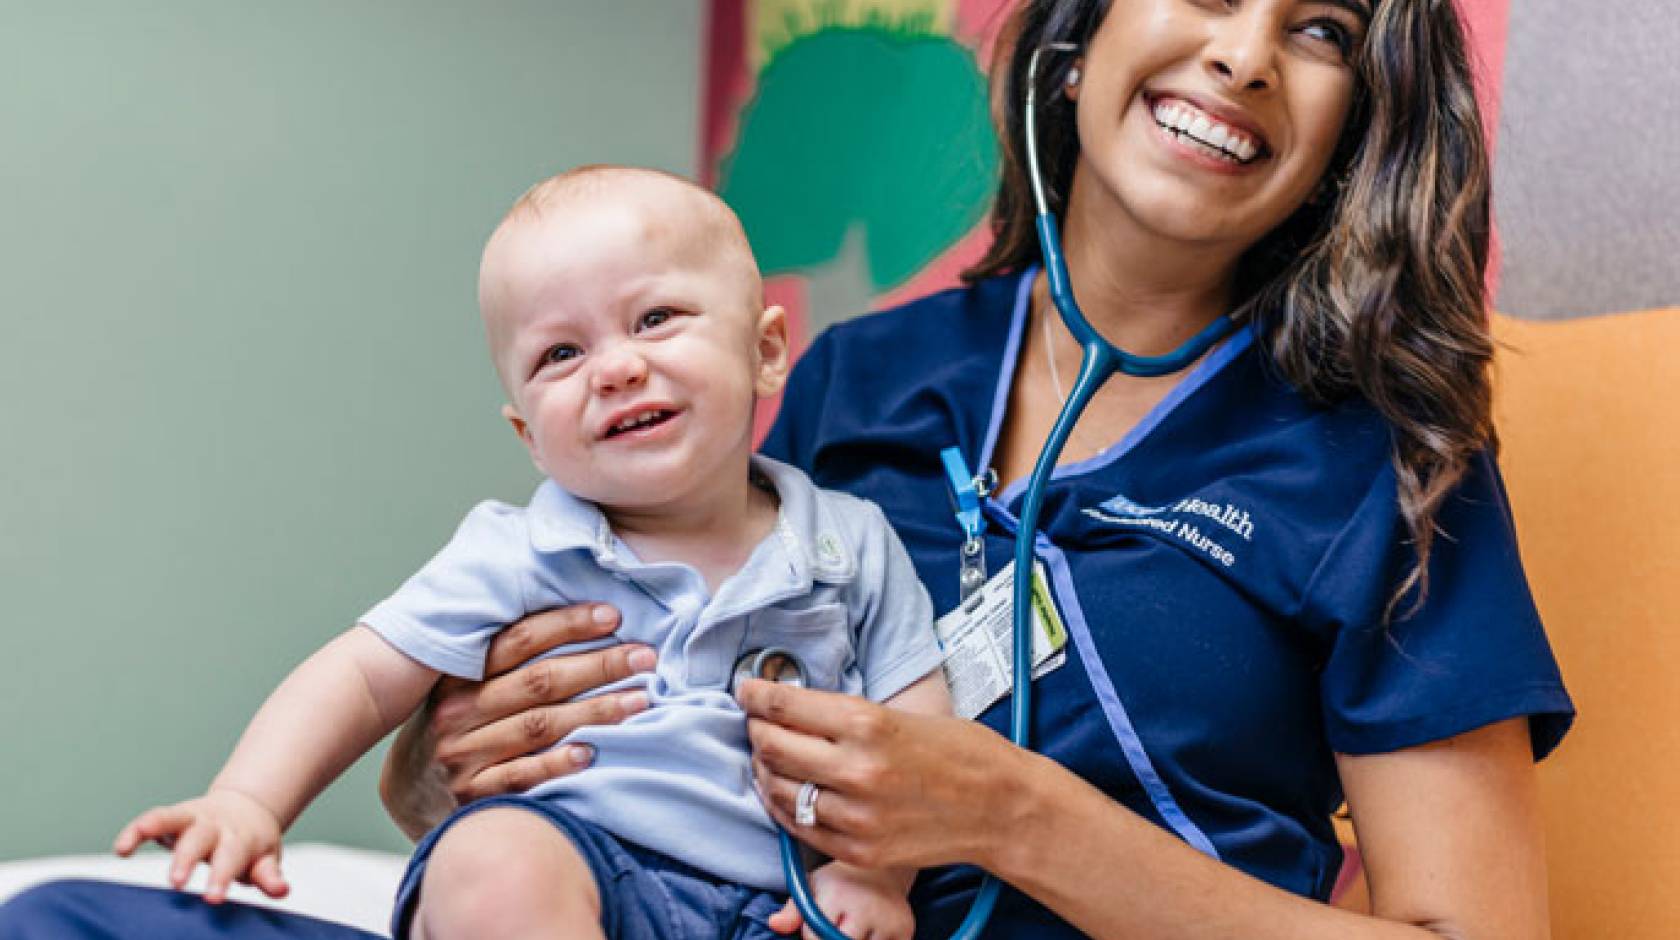 Nurse smiling with a baby